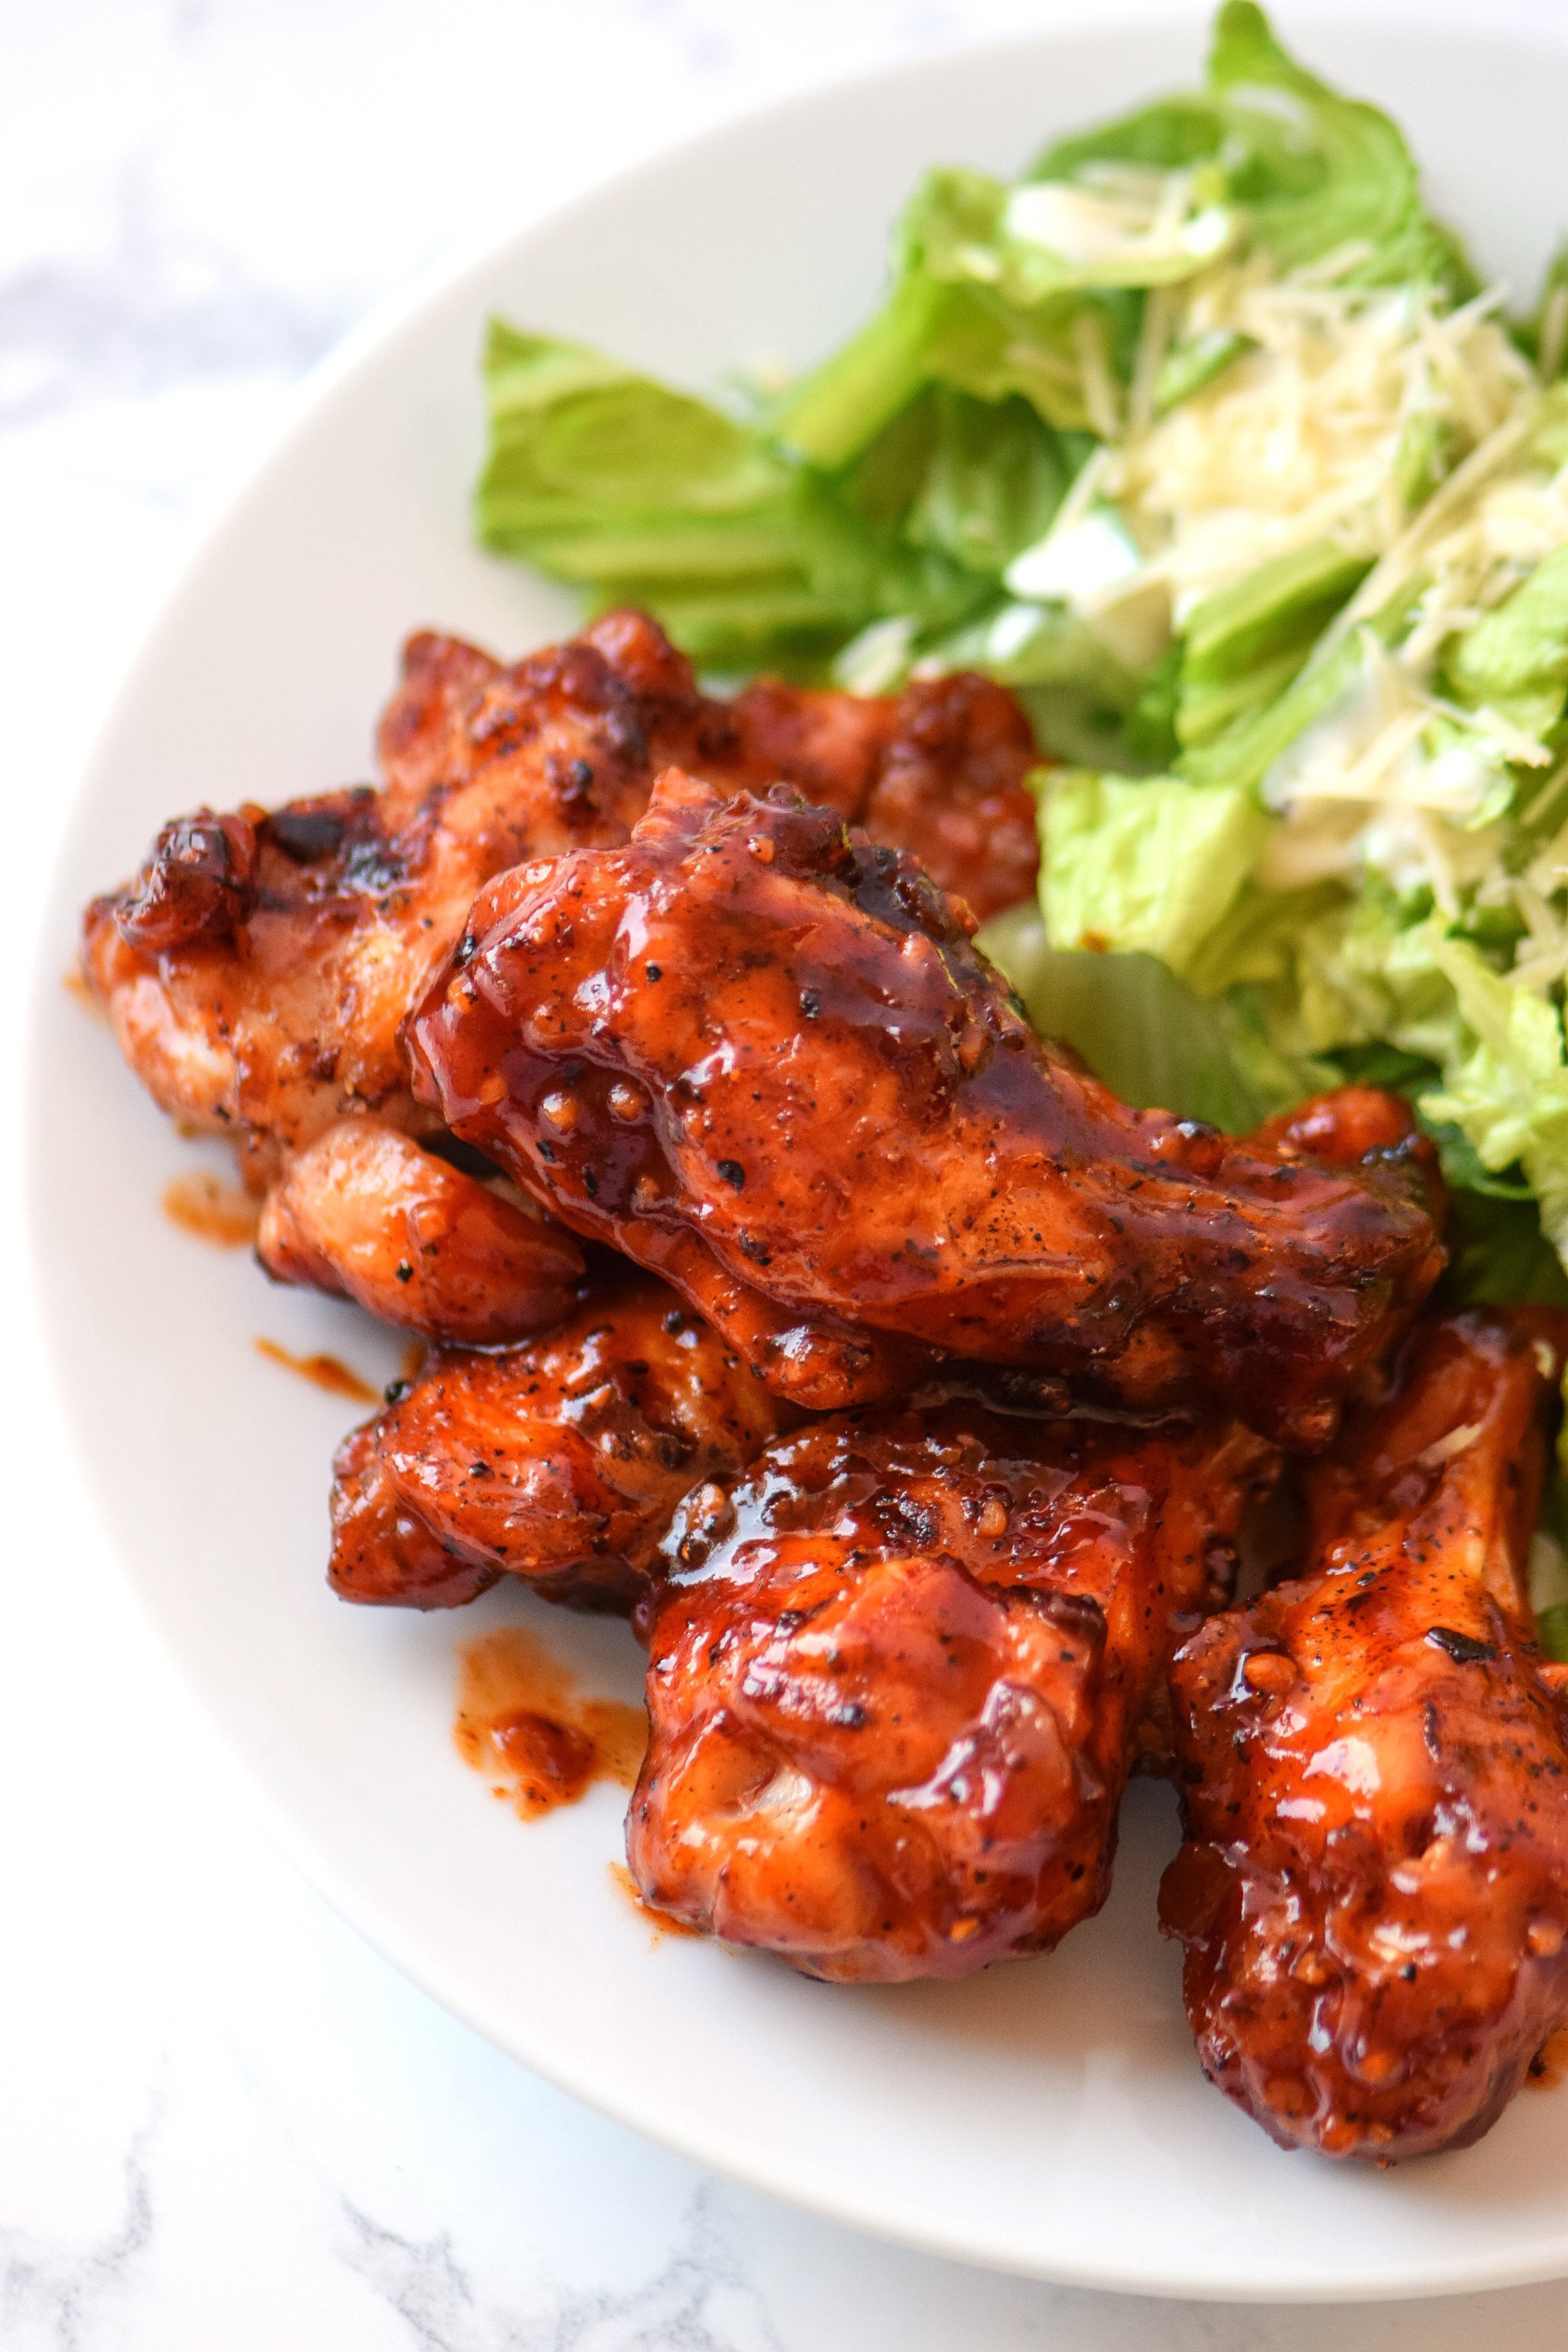 Smoky Habanero Barbecue Grilled Chicken Wings Project Meal Plan,Bake Bacon In Oven 425